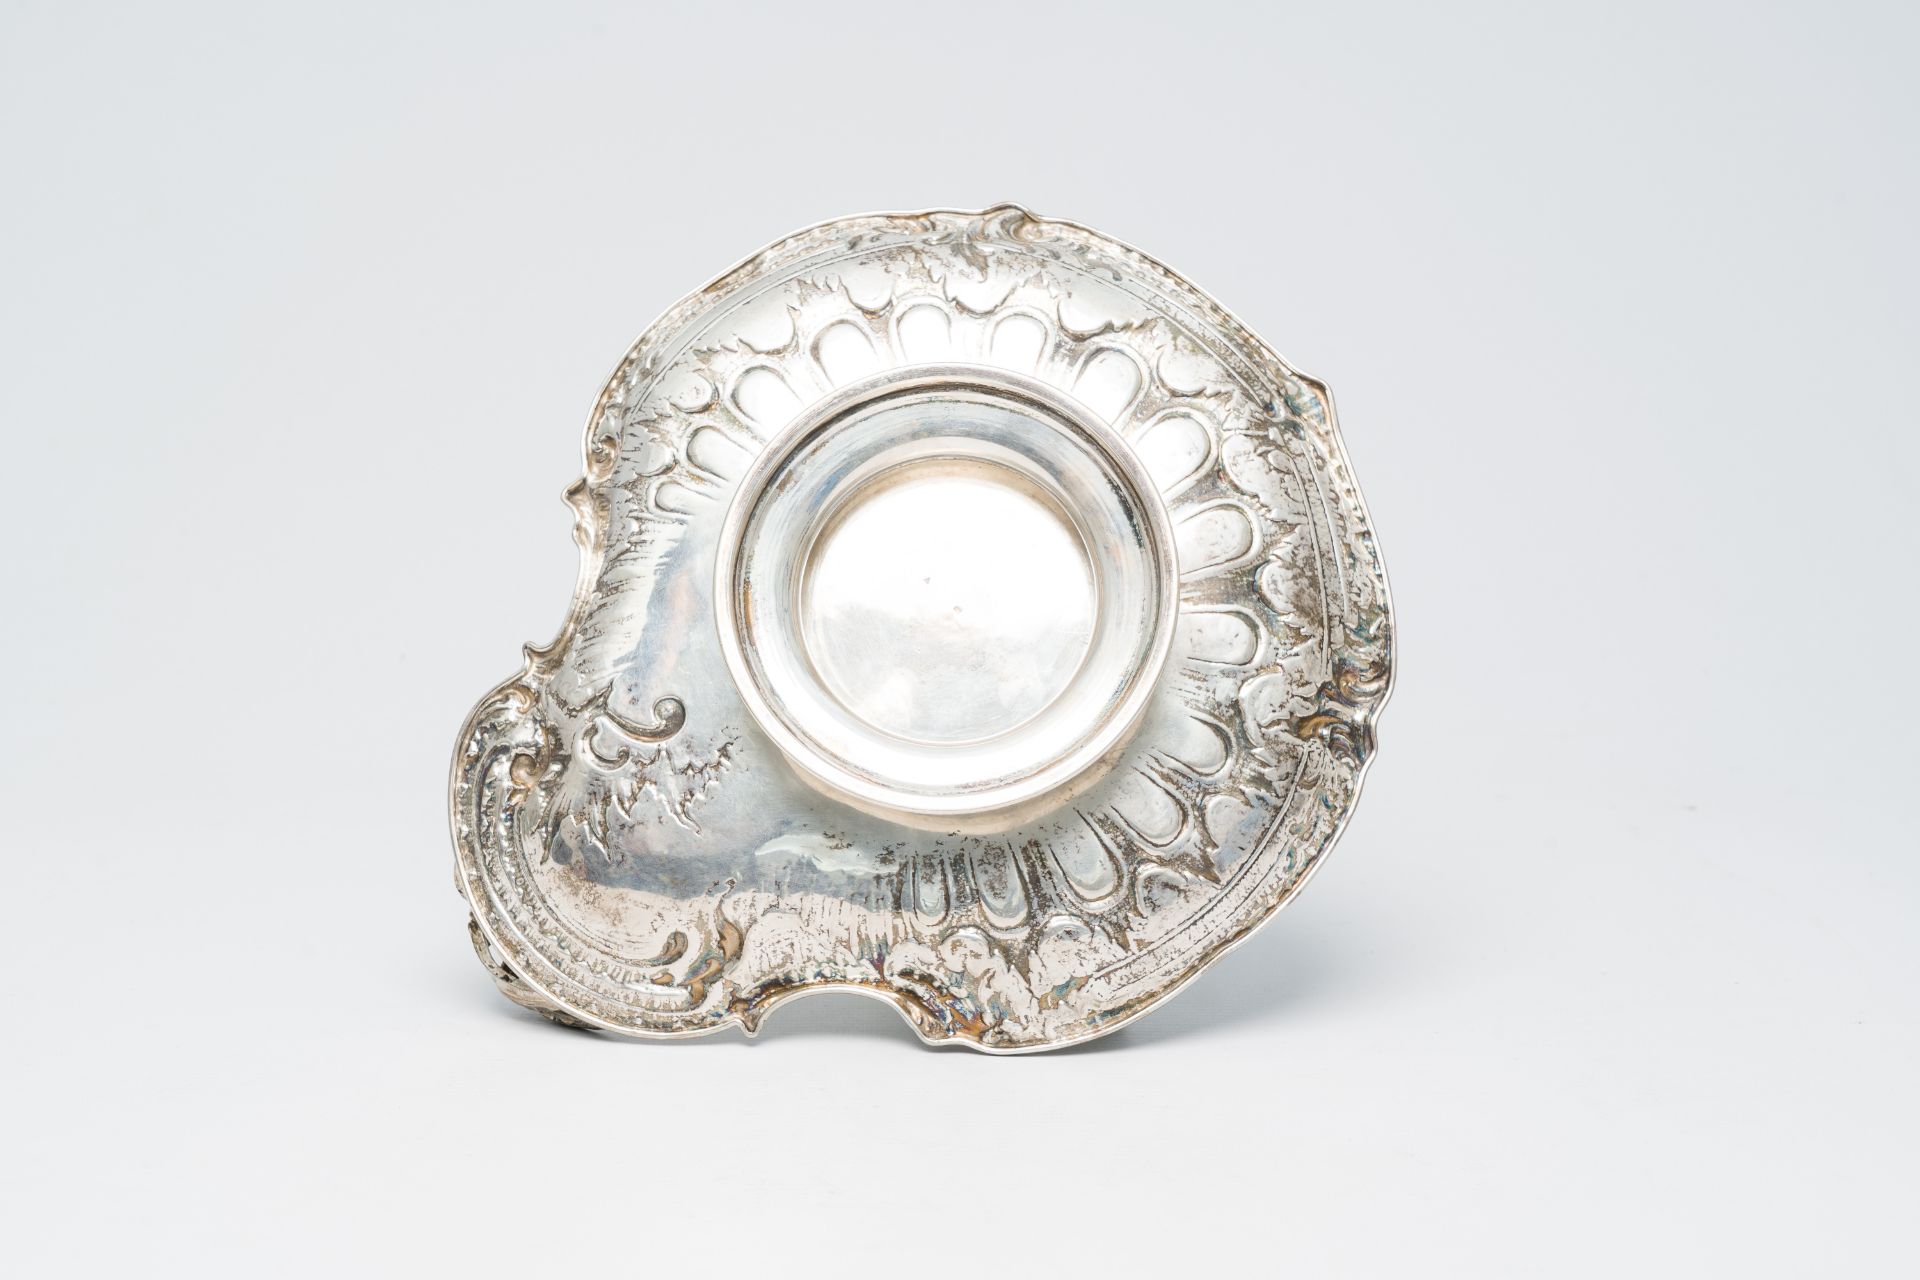 A Belgian shell-shaped silver Louis XV style dish on foot, maker's mark Wolfers, 800/000, Brussels, - Image 8 of 9